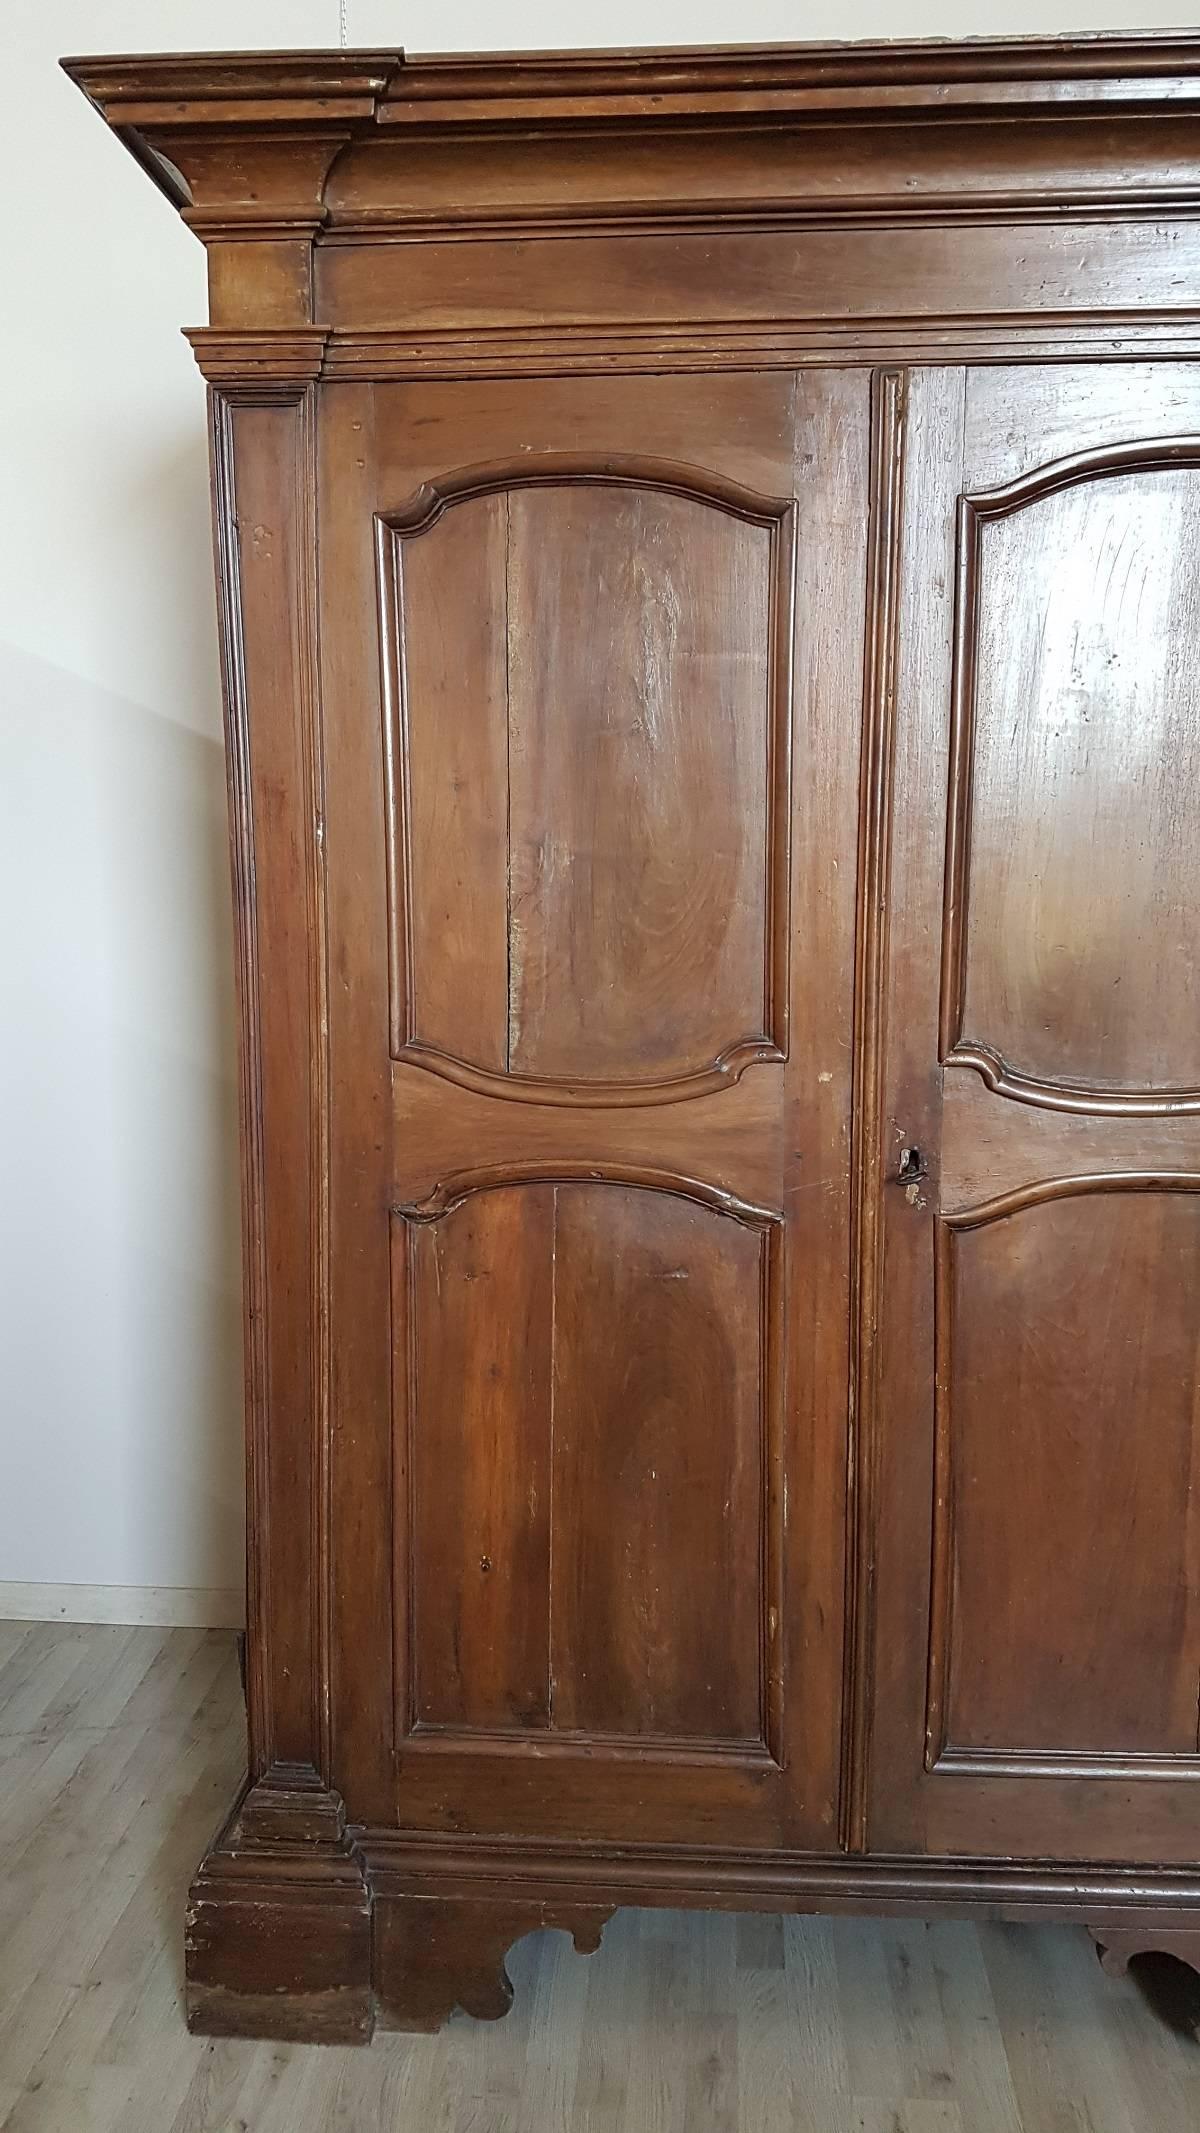 Rare and important antique wardrobe in solid walnut made in the late seventeenth century in the seventeenth century baroque Louis XIV. The line is in fact typical of this period of high period that wanted this type of furnishings of great grandeur